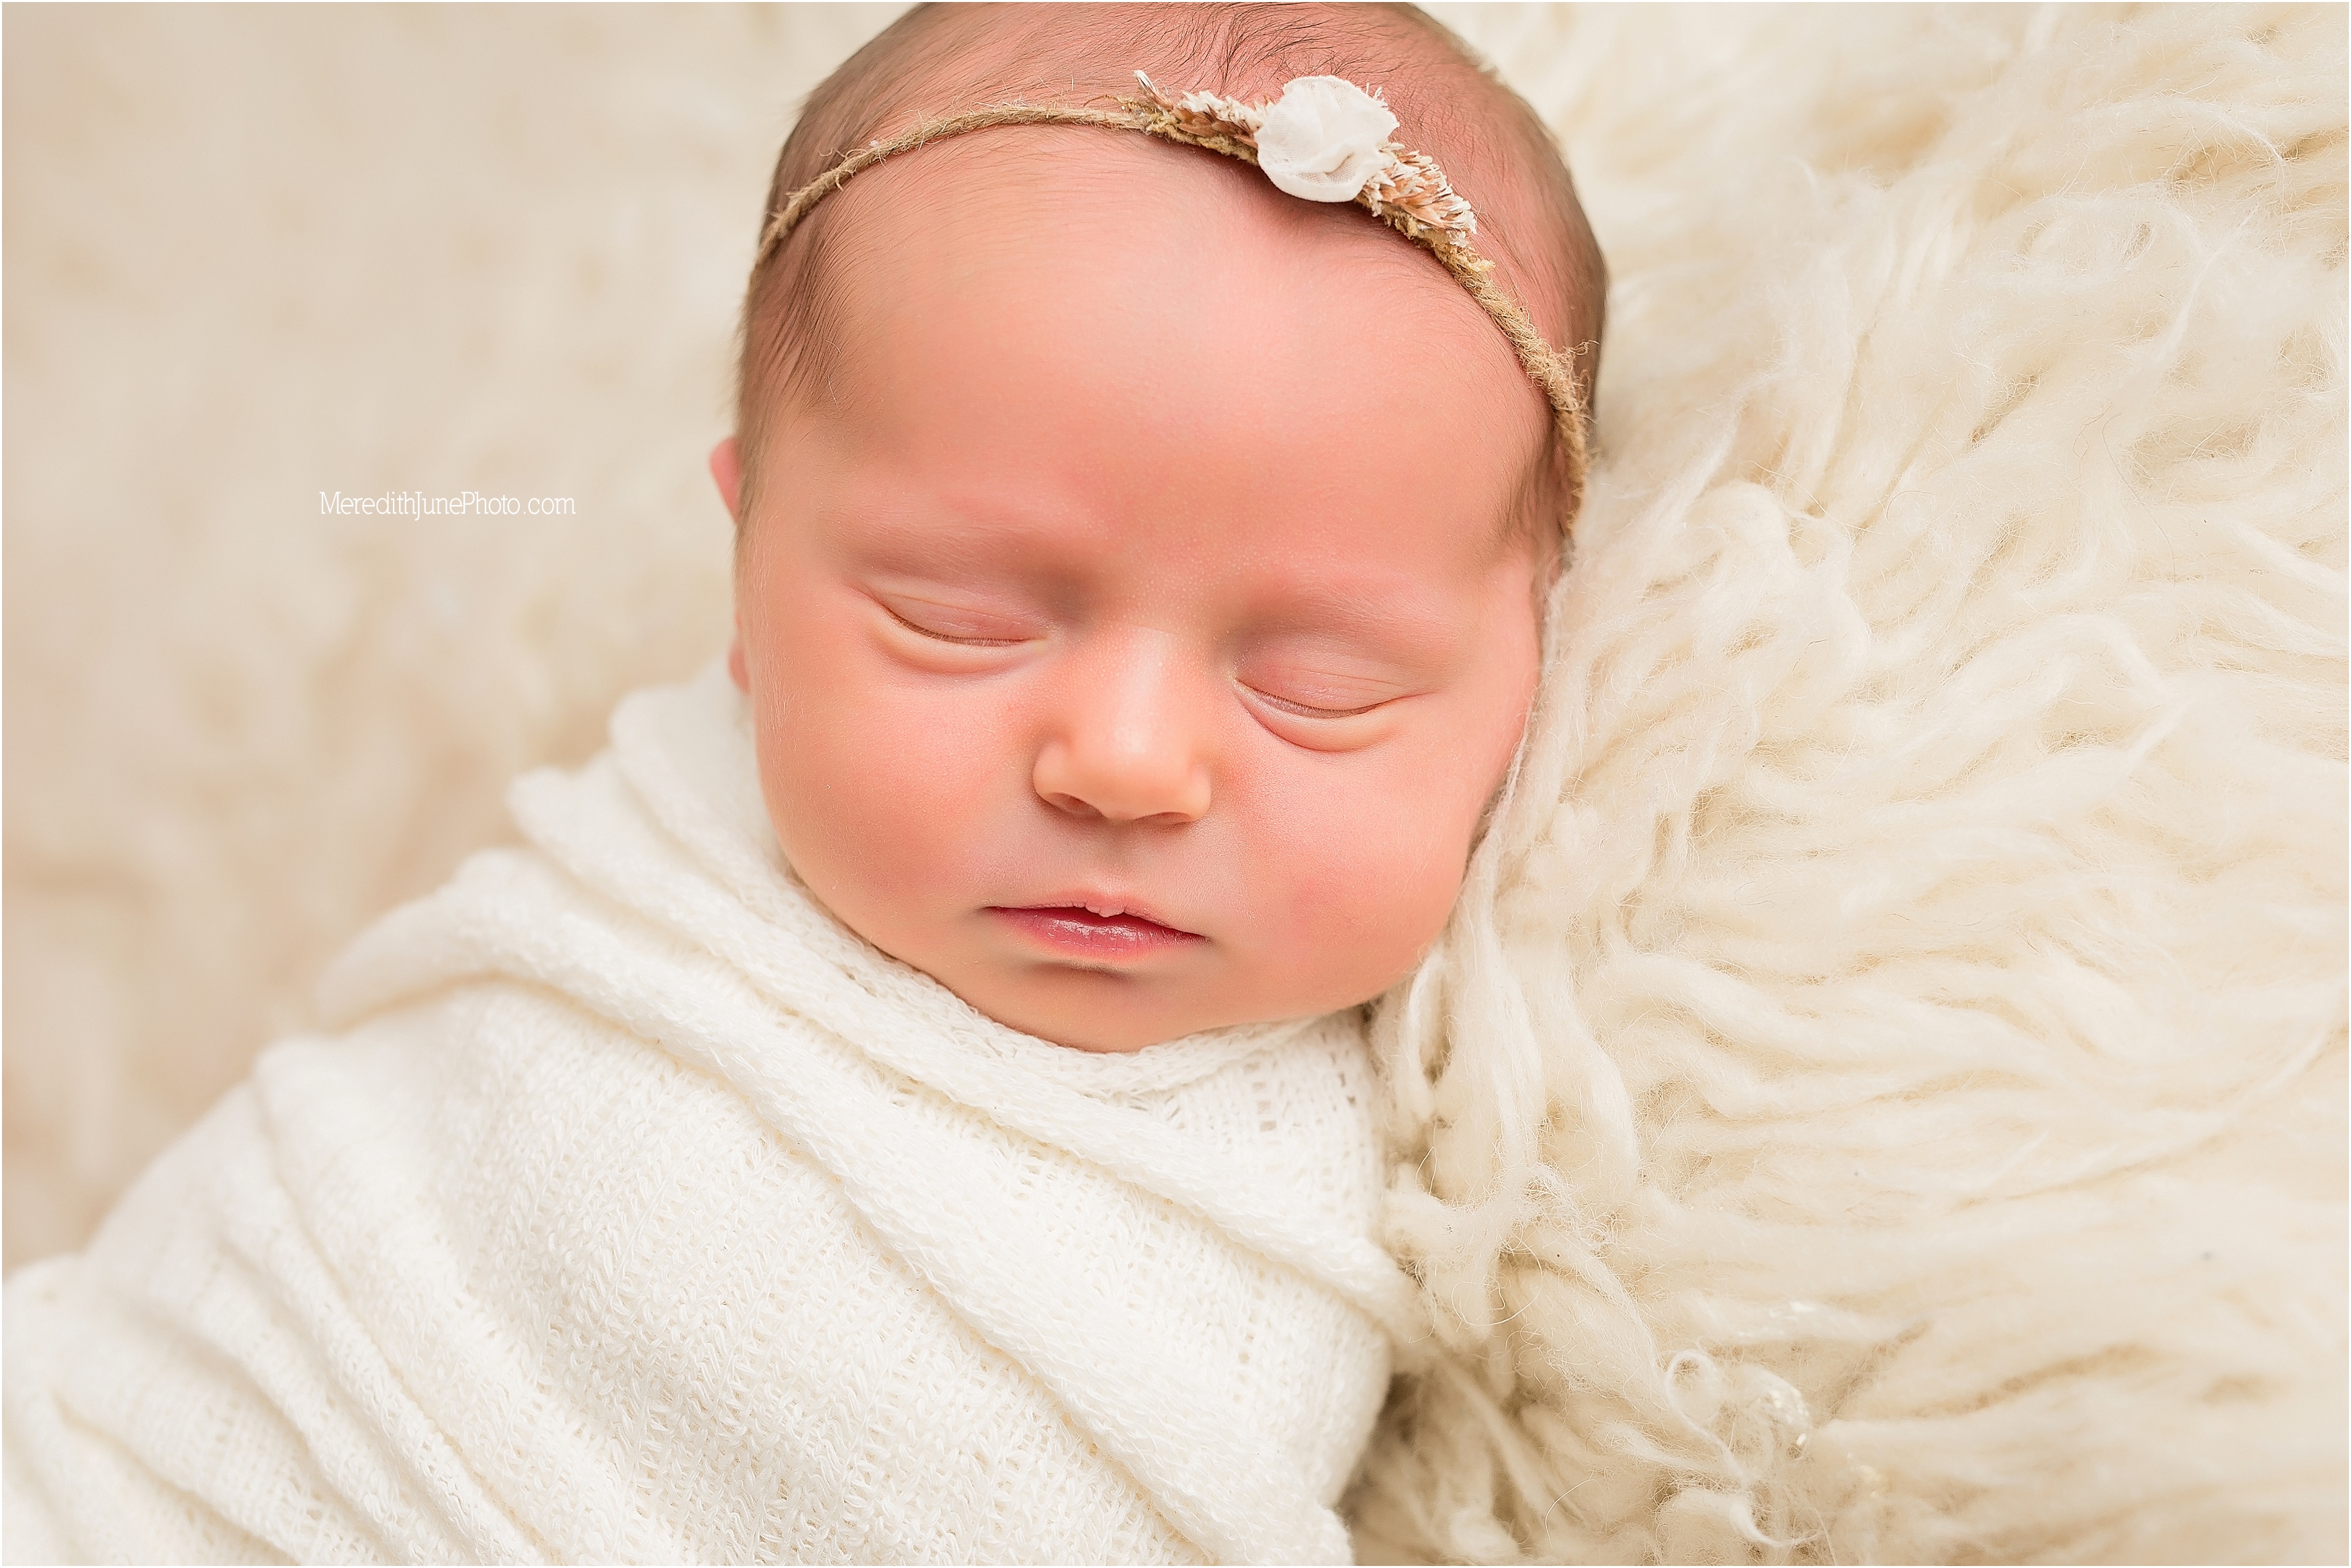 Adalyn's newborn session at Meredith June Photography 